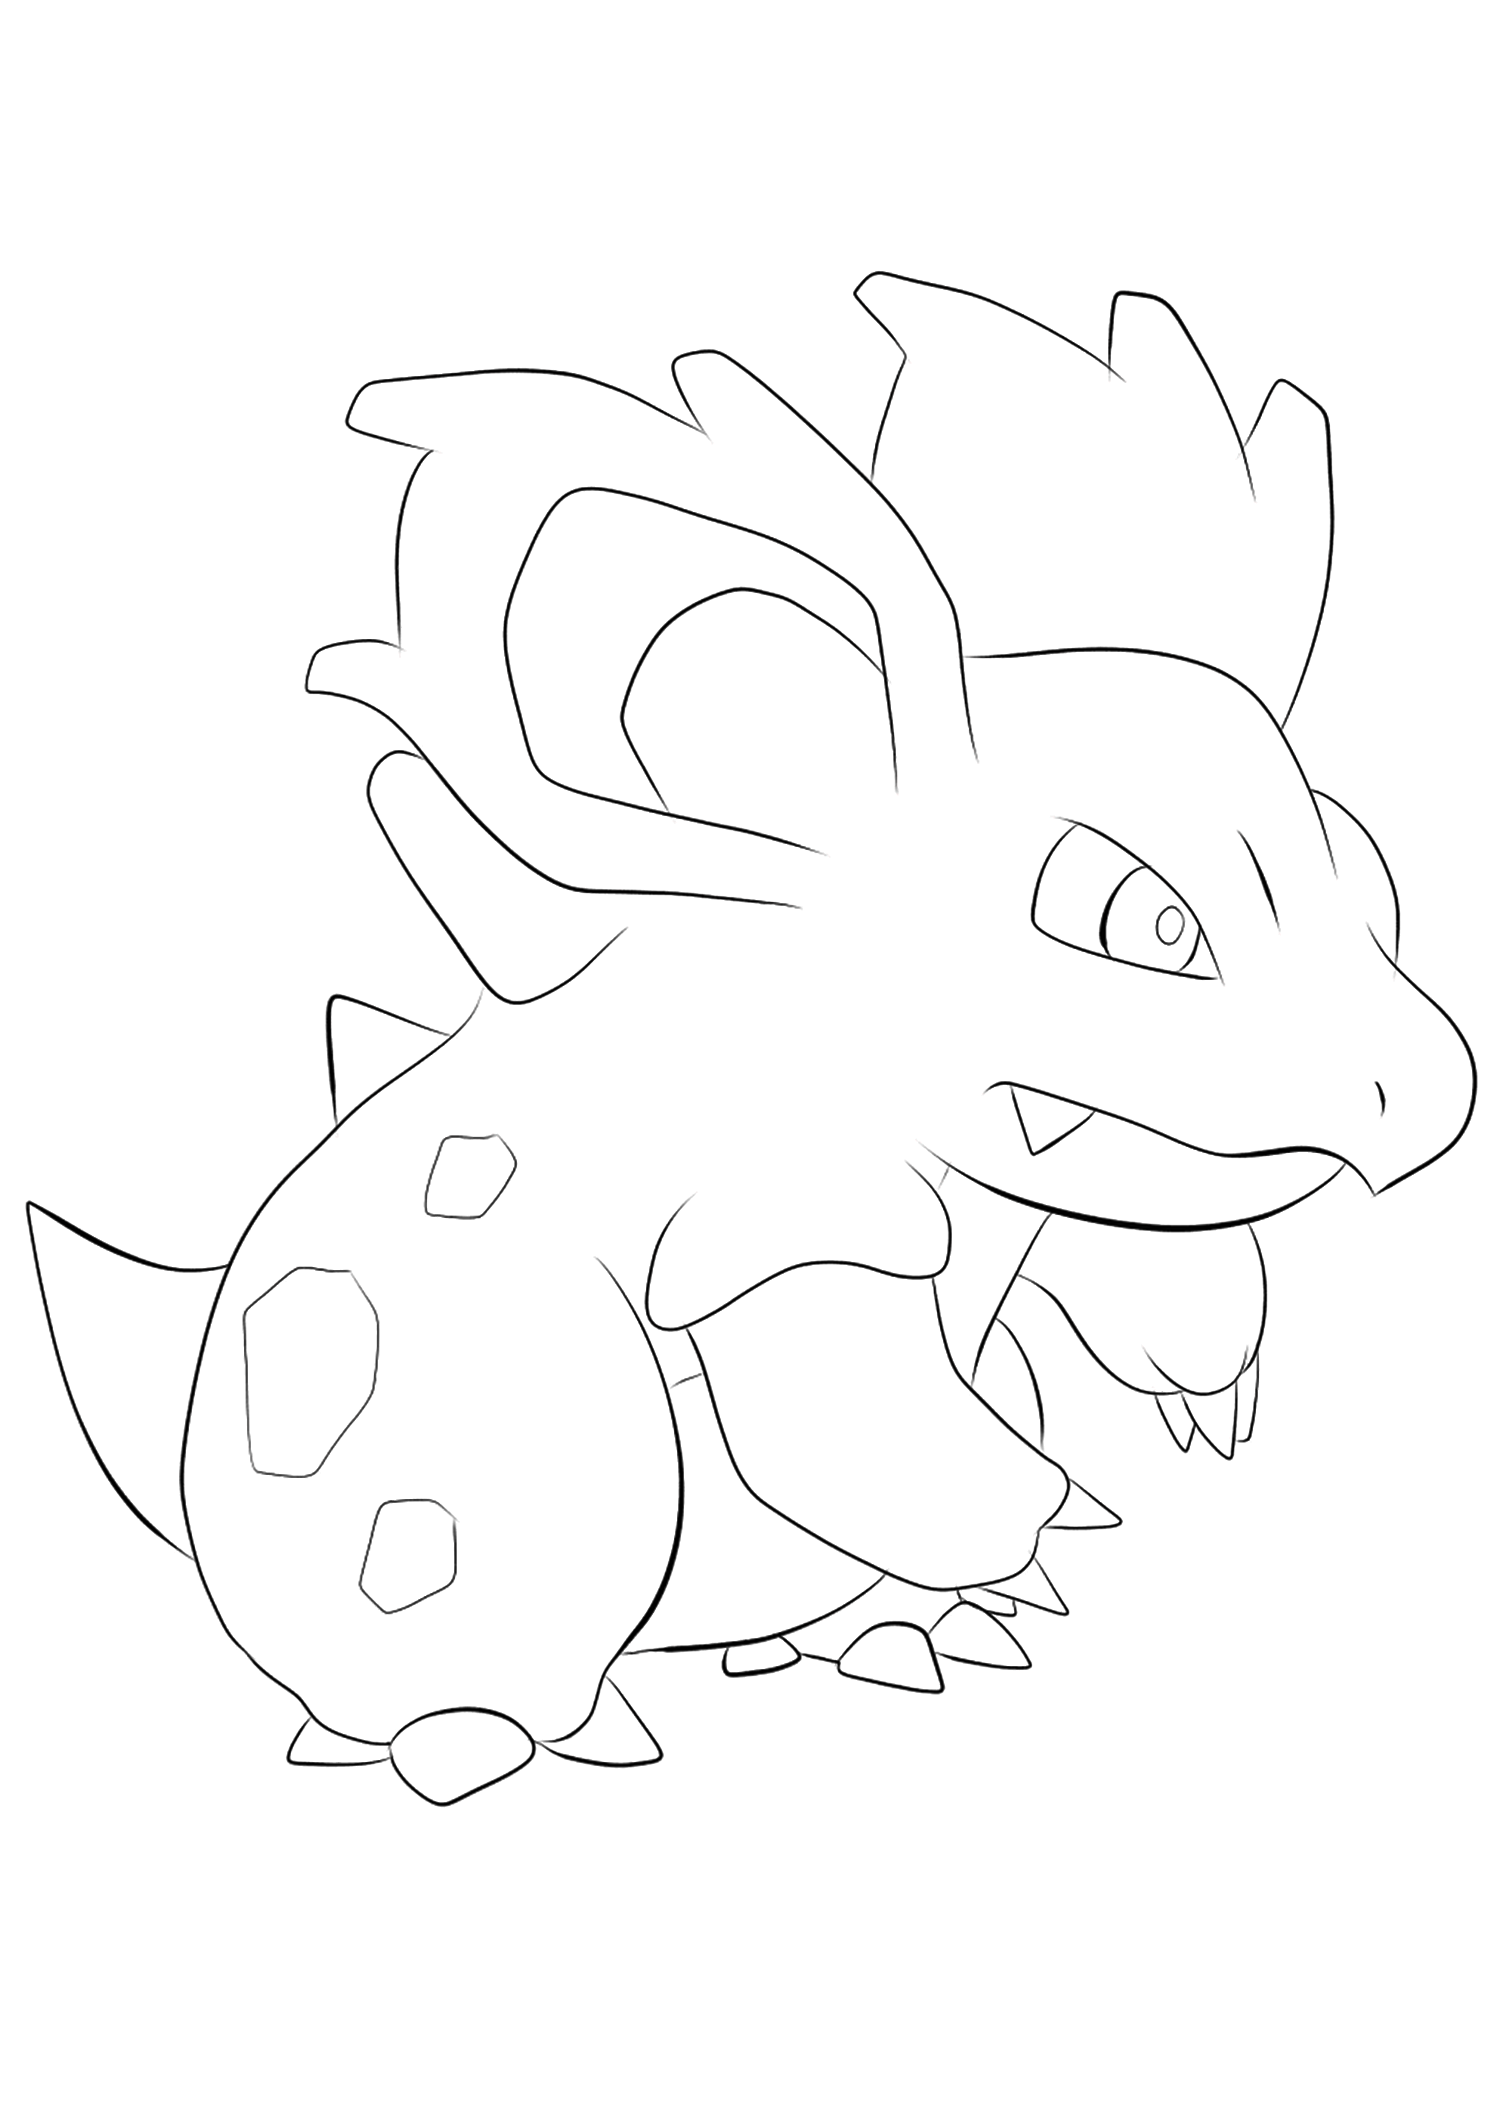 Nidorina (No.30). Nidorina Coloring page, Generation I Pokemon of type PoisonOriginal image credit: Pokemon linearts by Lilly Gerbil'font-size:smaller;color:gray'>Permission: All rights reserved © Pokemon company and Ken Sugimori.